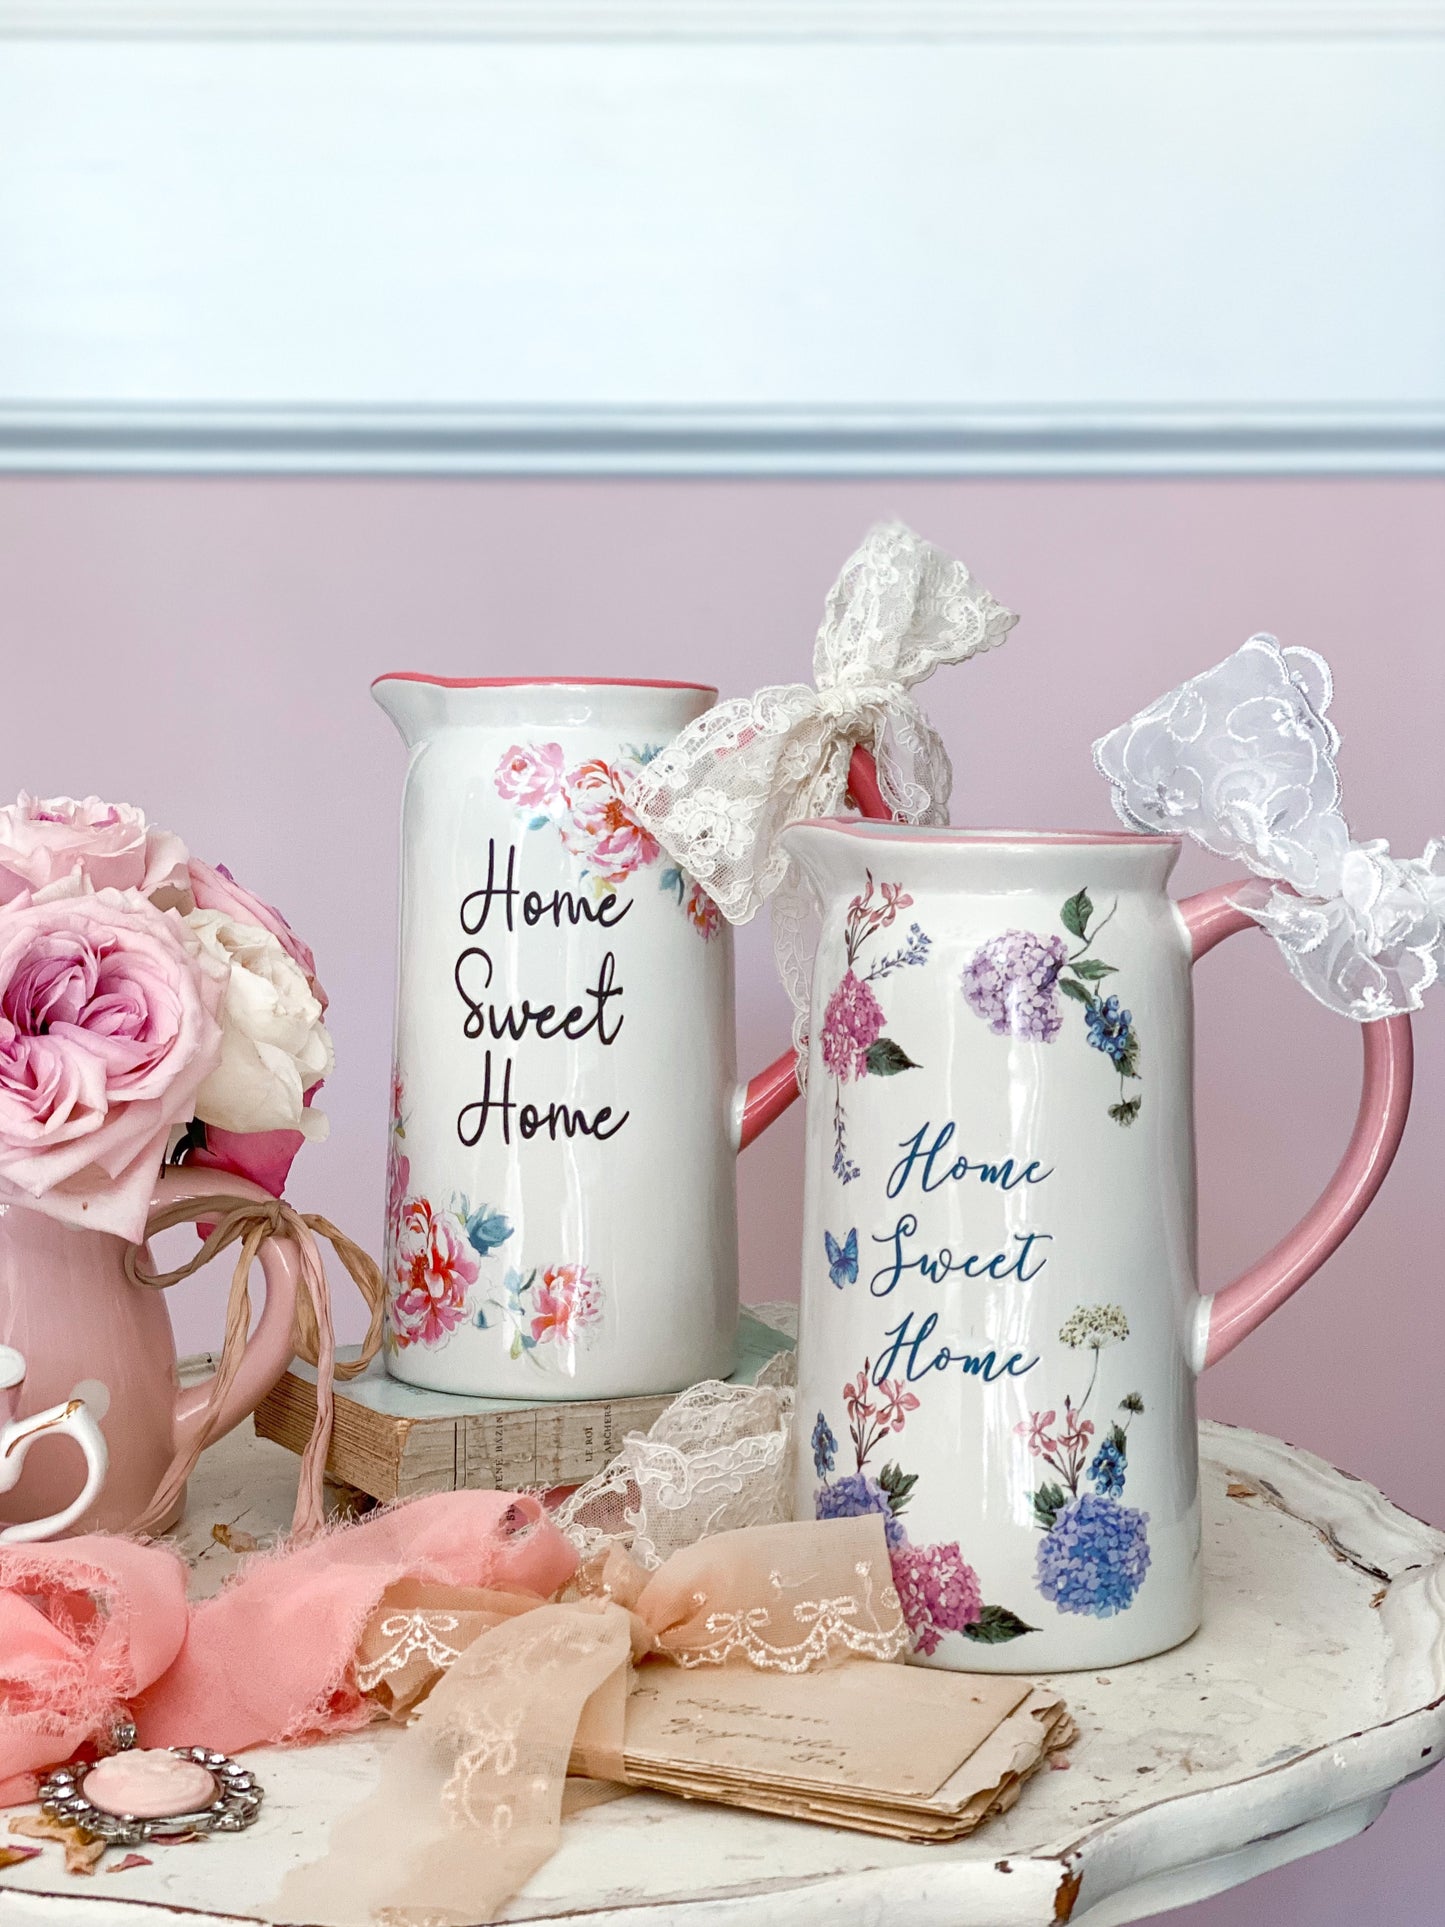 Home Sweet Home Pastel pink, blue and purple Floral Pitchers with peonies and hydrangeas